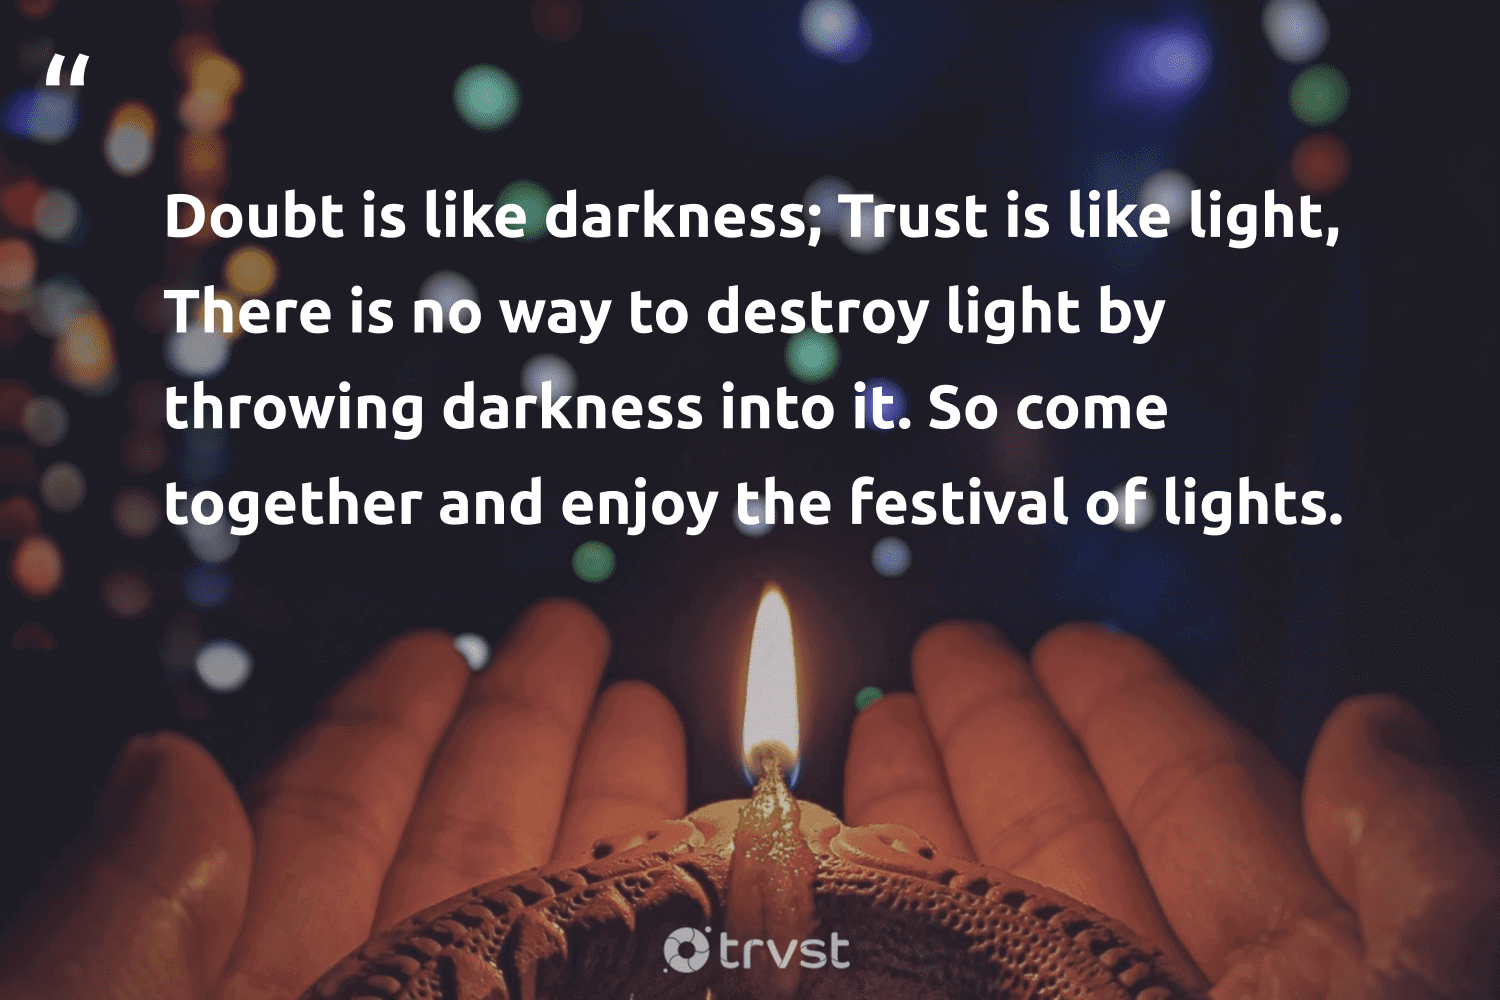 diwali quotes doubt is like darkness tr 5050